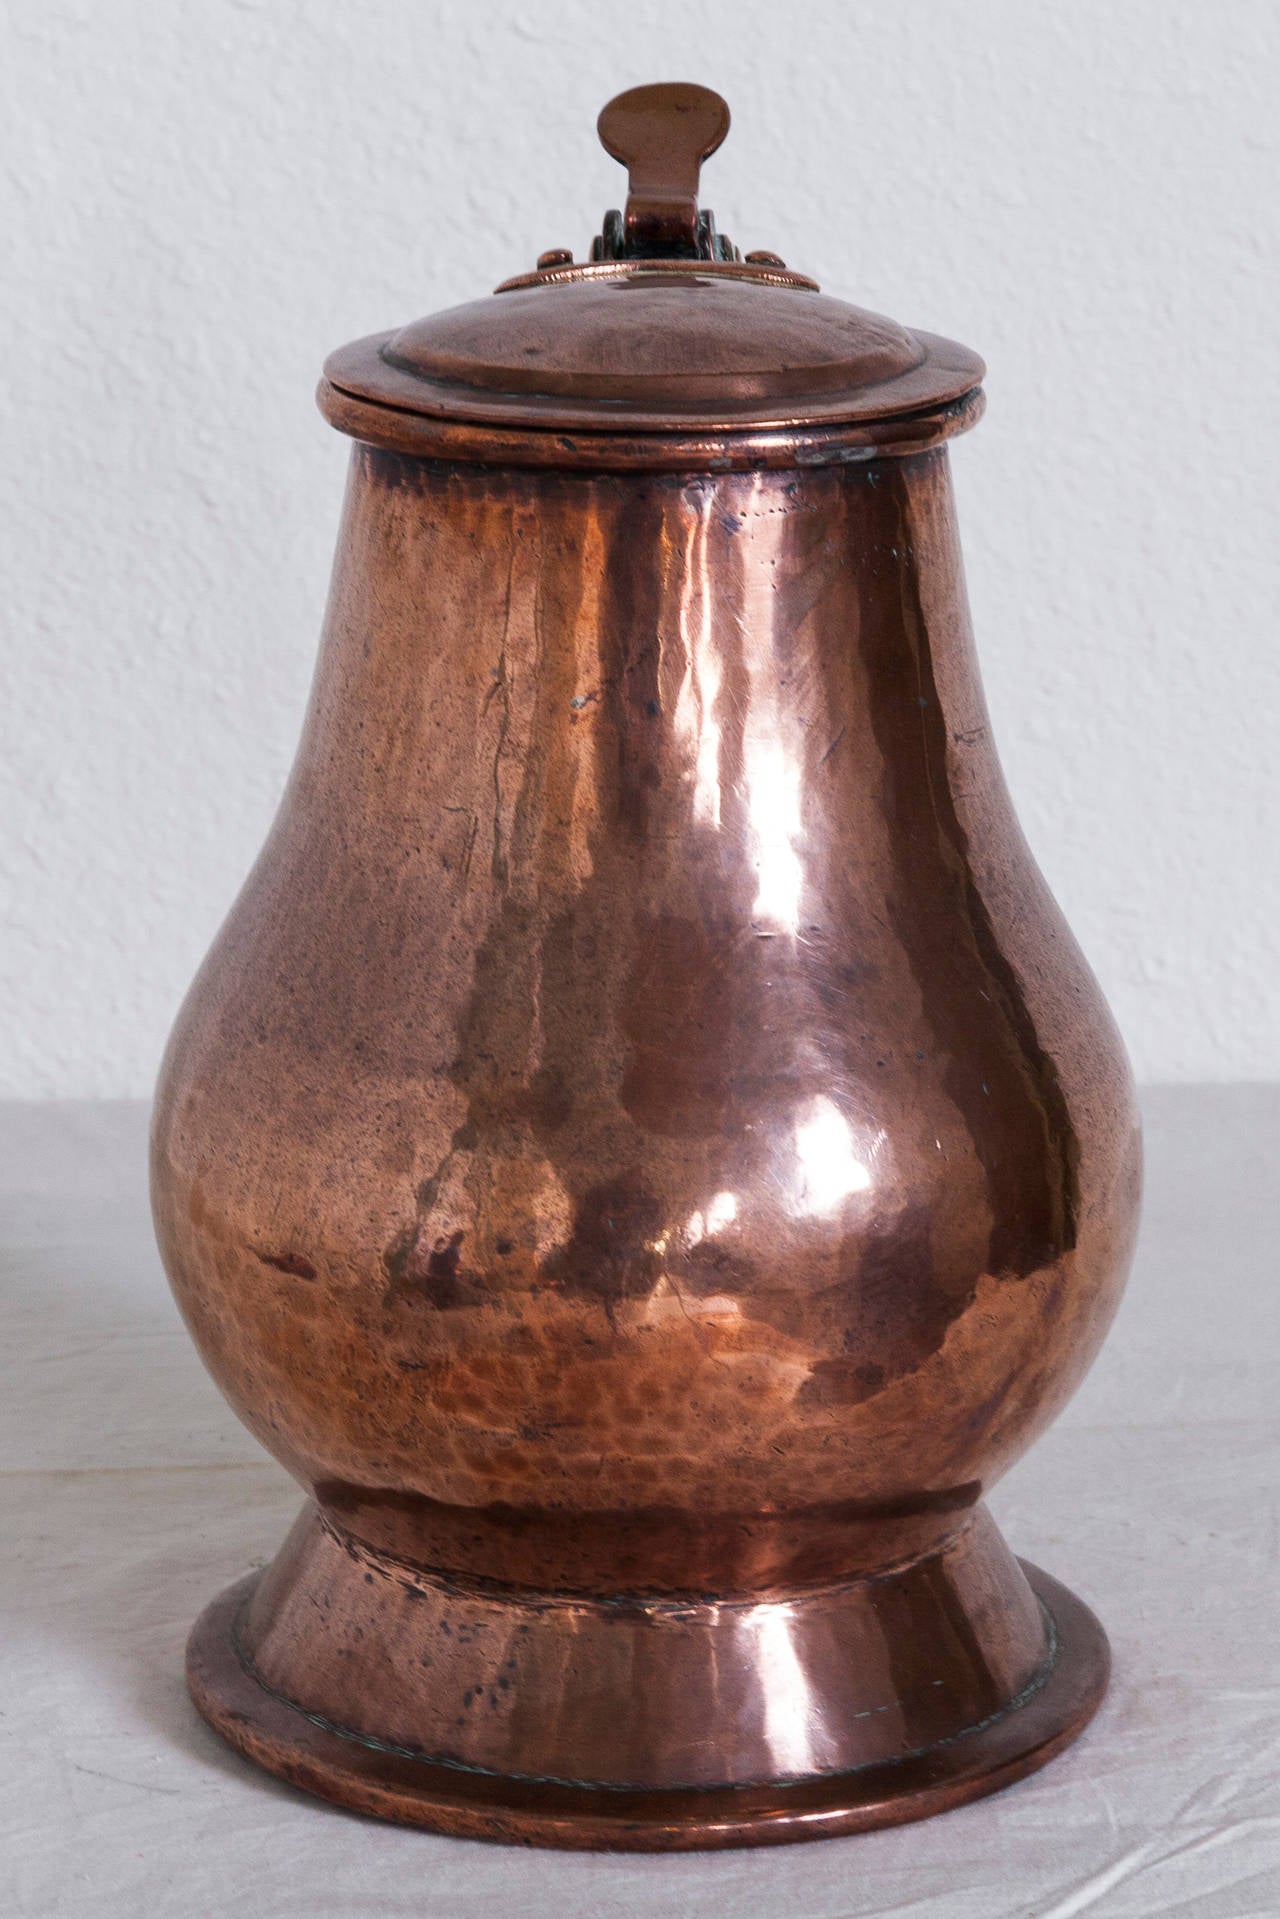 This large 18th century hand-hammered copper tankard from France features visible seams where the copper smith made his joinery in fashioning this one-of-a-kind piece. Both handle and hinged lid have copper rivets. Weighs 10.5 pounds.